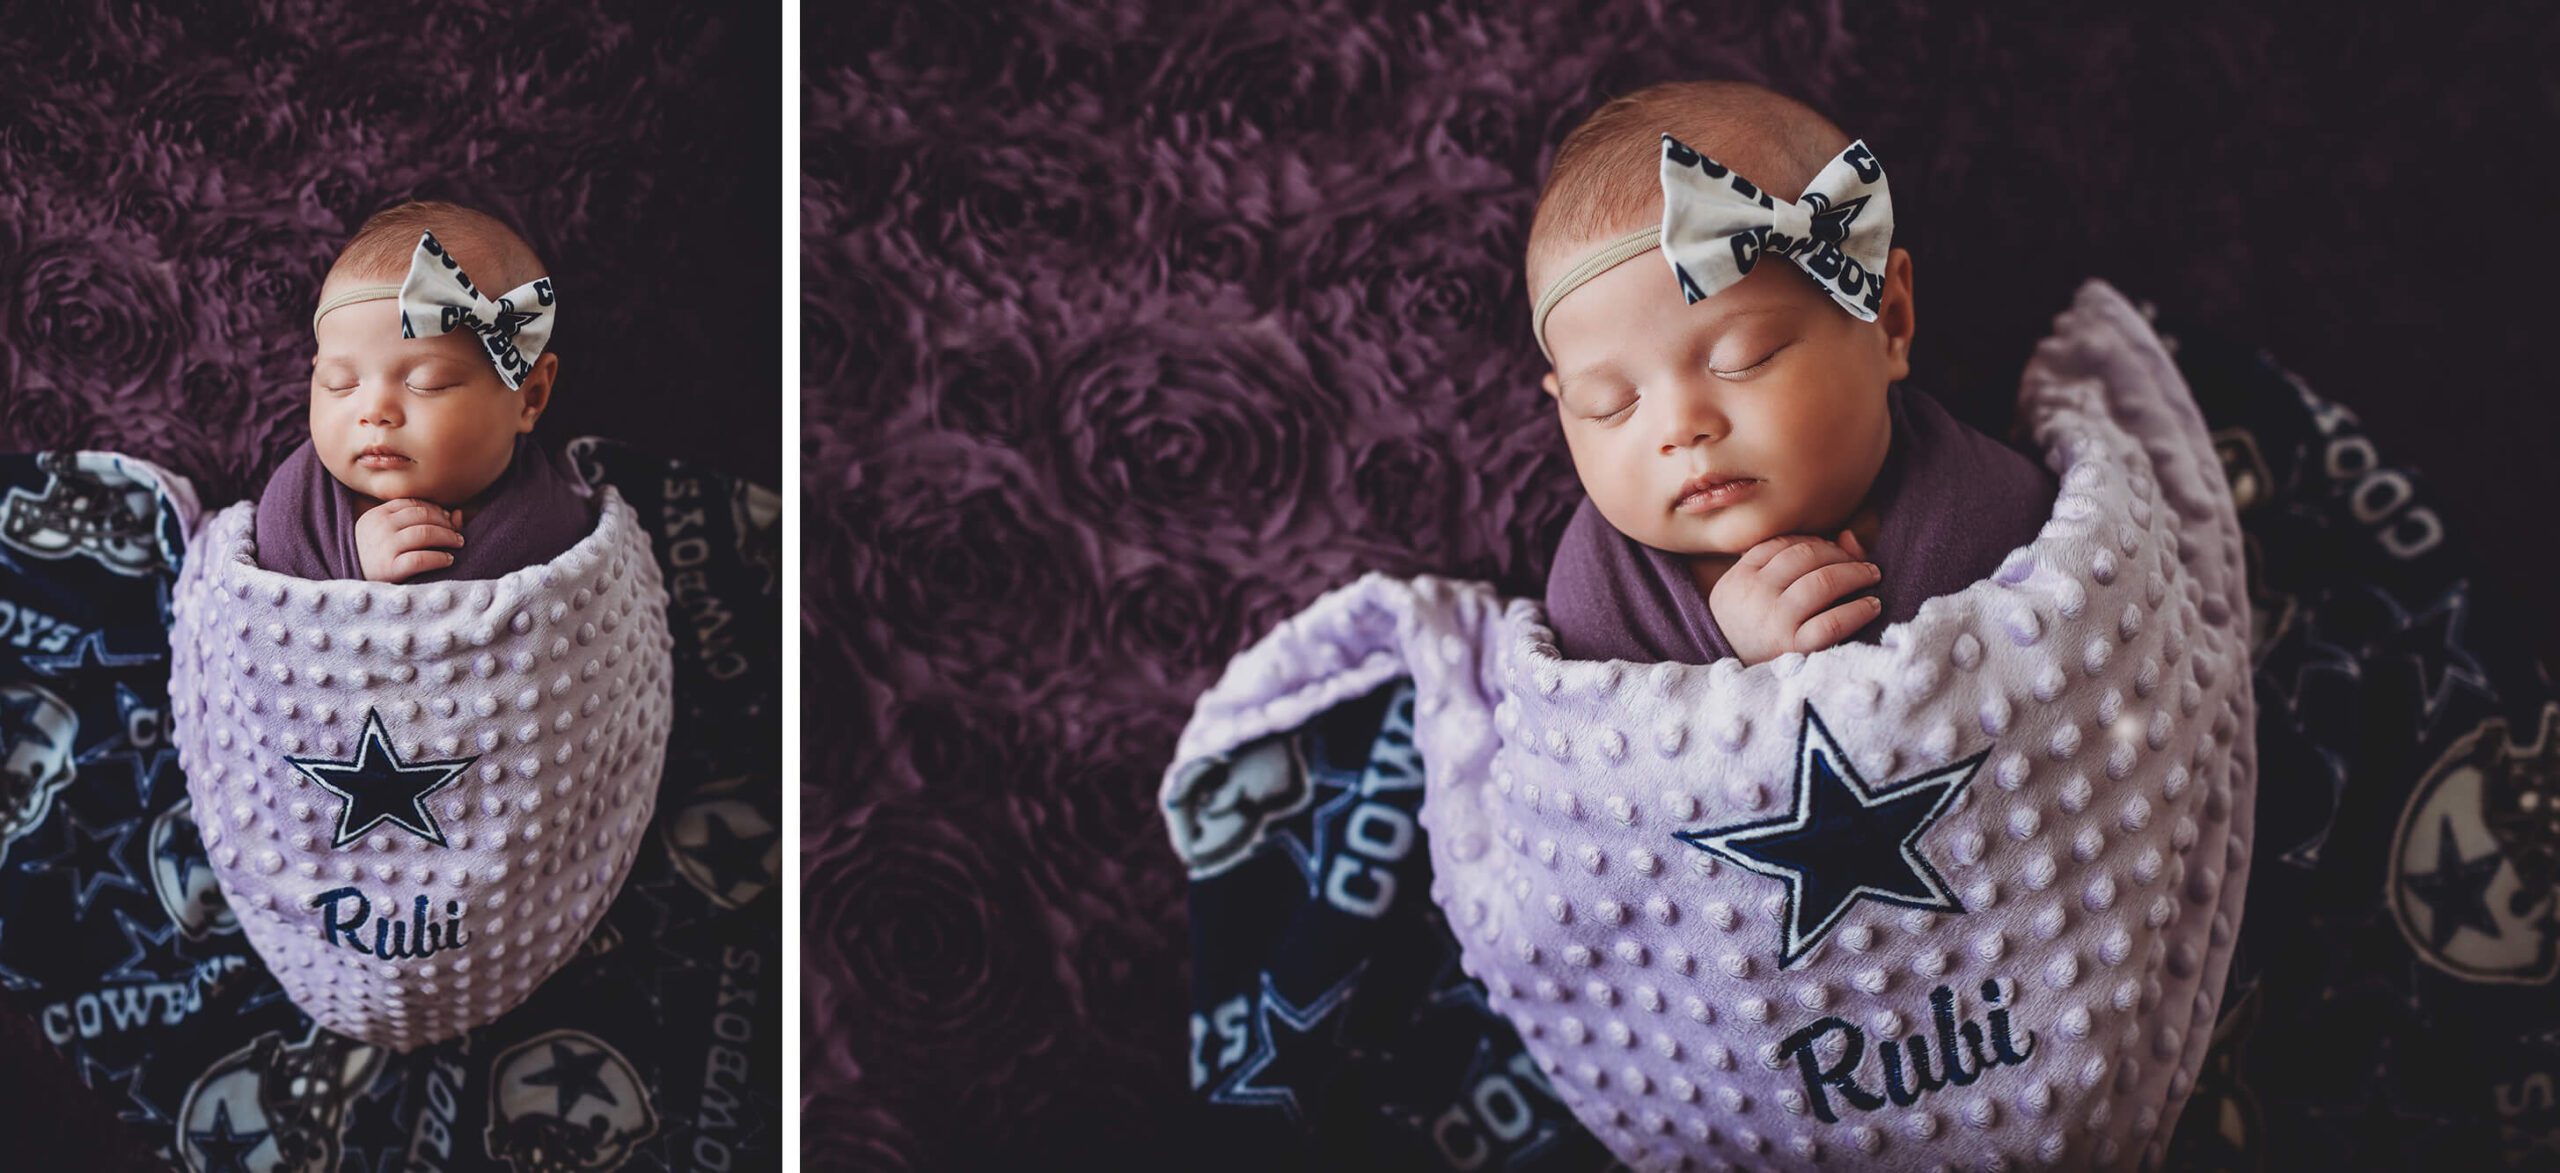 A precious Dallas Cowboys blanket made just for Ruby.